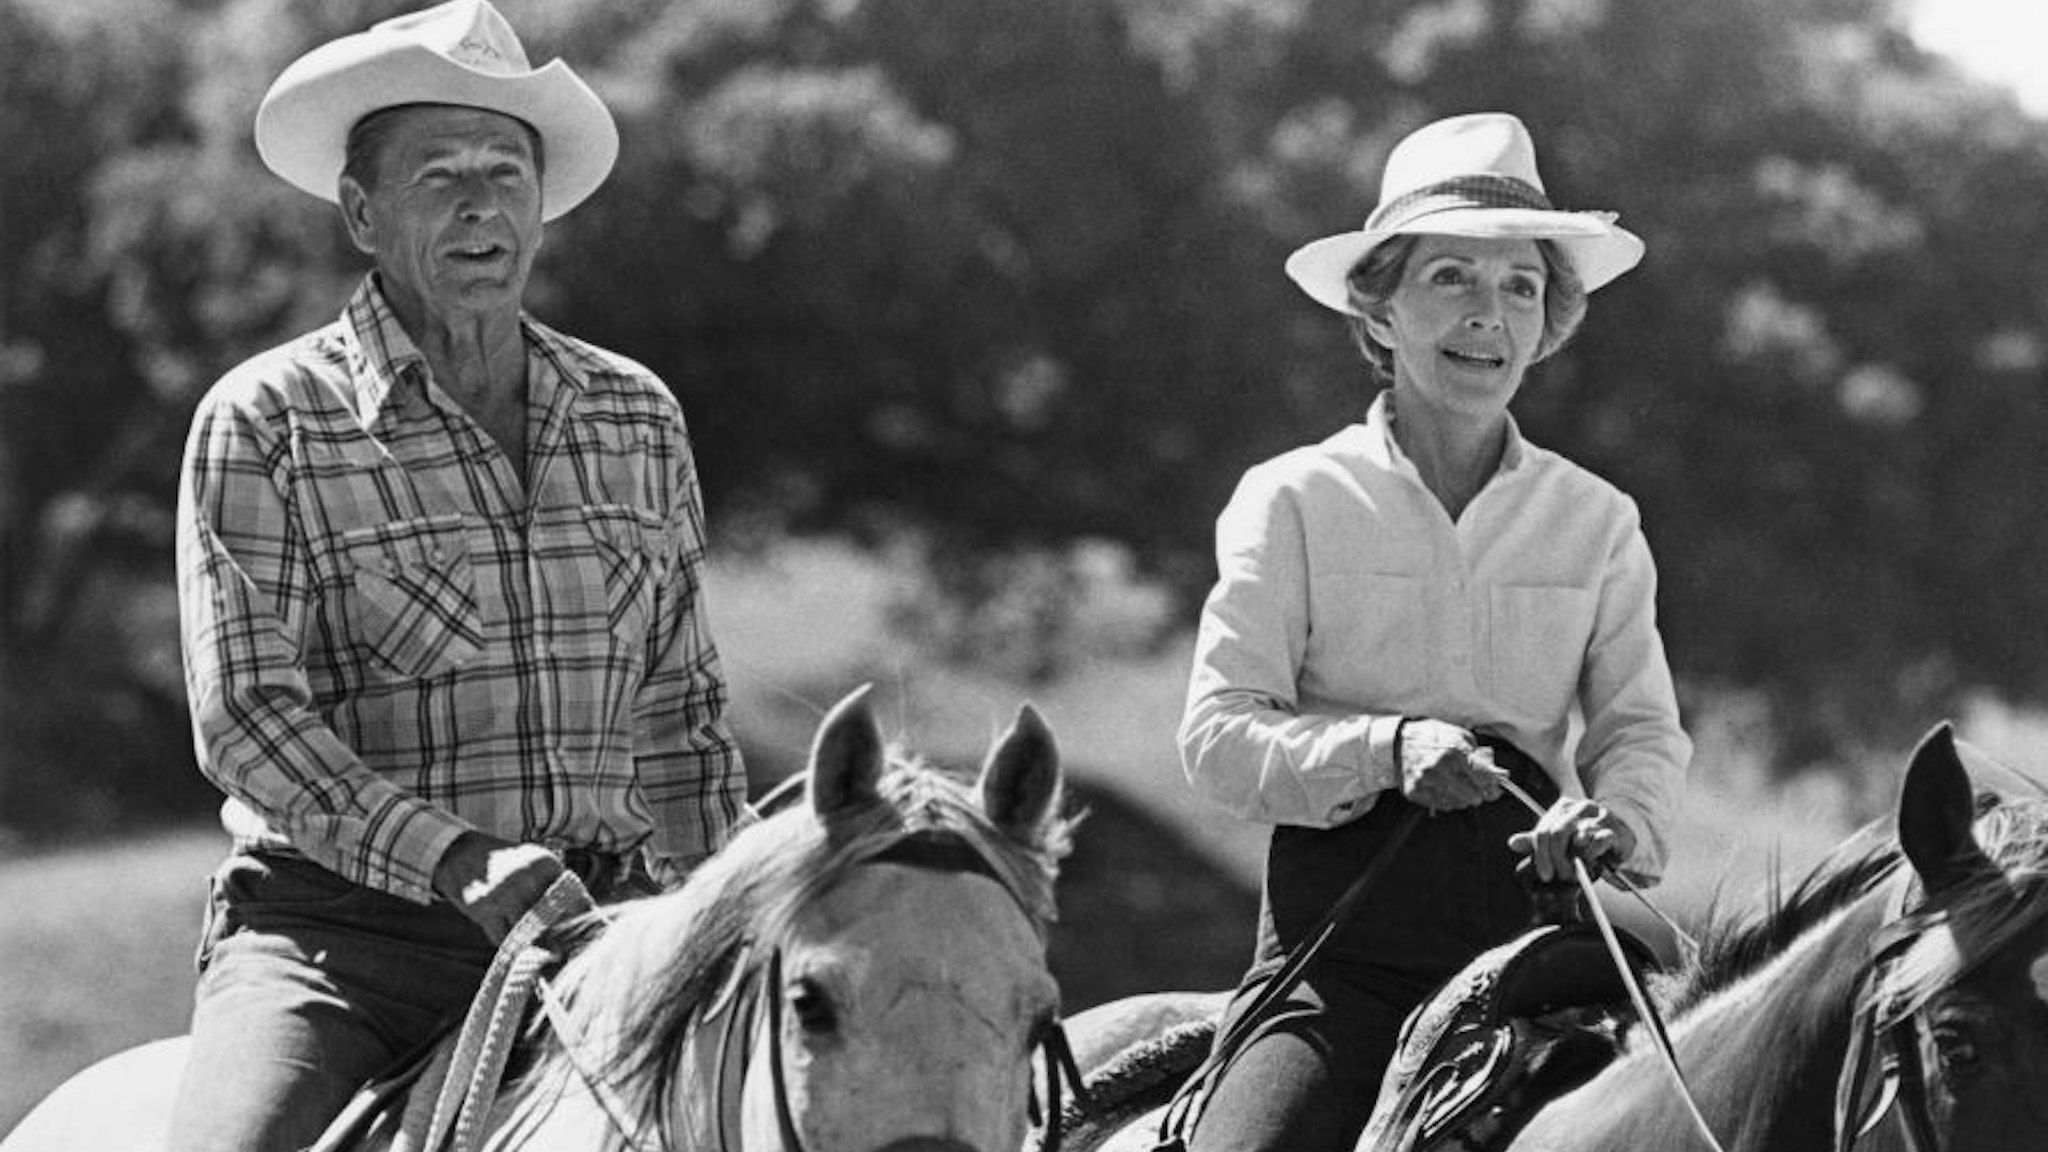 10th January 1981: US President Ronald Reagan and First Lady Nancy Reagan ride horses next to each other. Photograph probably taken at their ranch in Santa Barbara, California. (Photo by Express/Express/Getty Images)